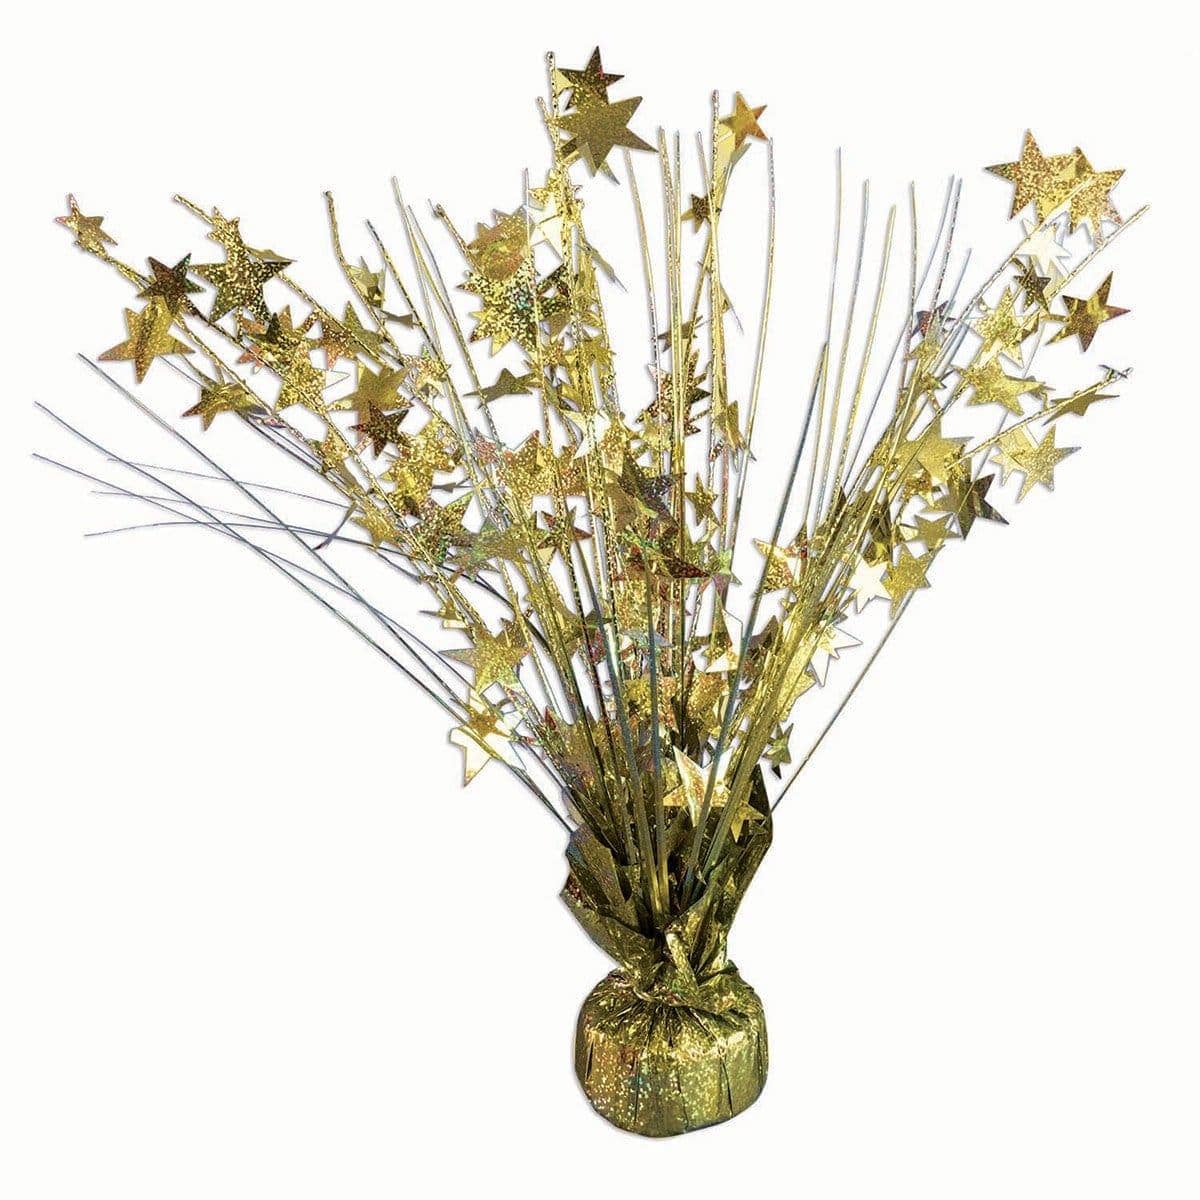 Buy Decorations Centerpieces 15 In. Star - Gold sold at Party Expert